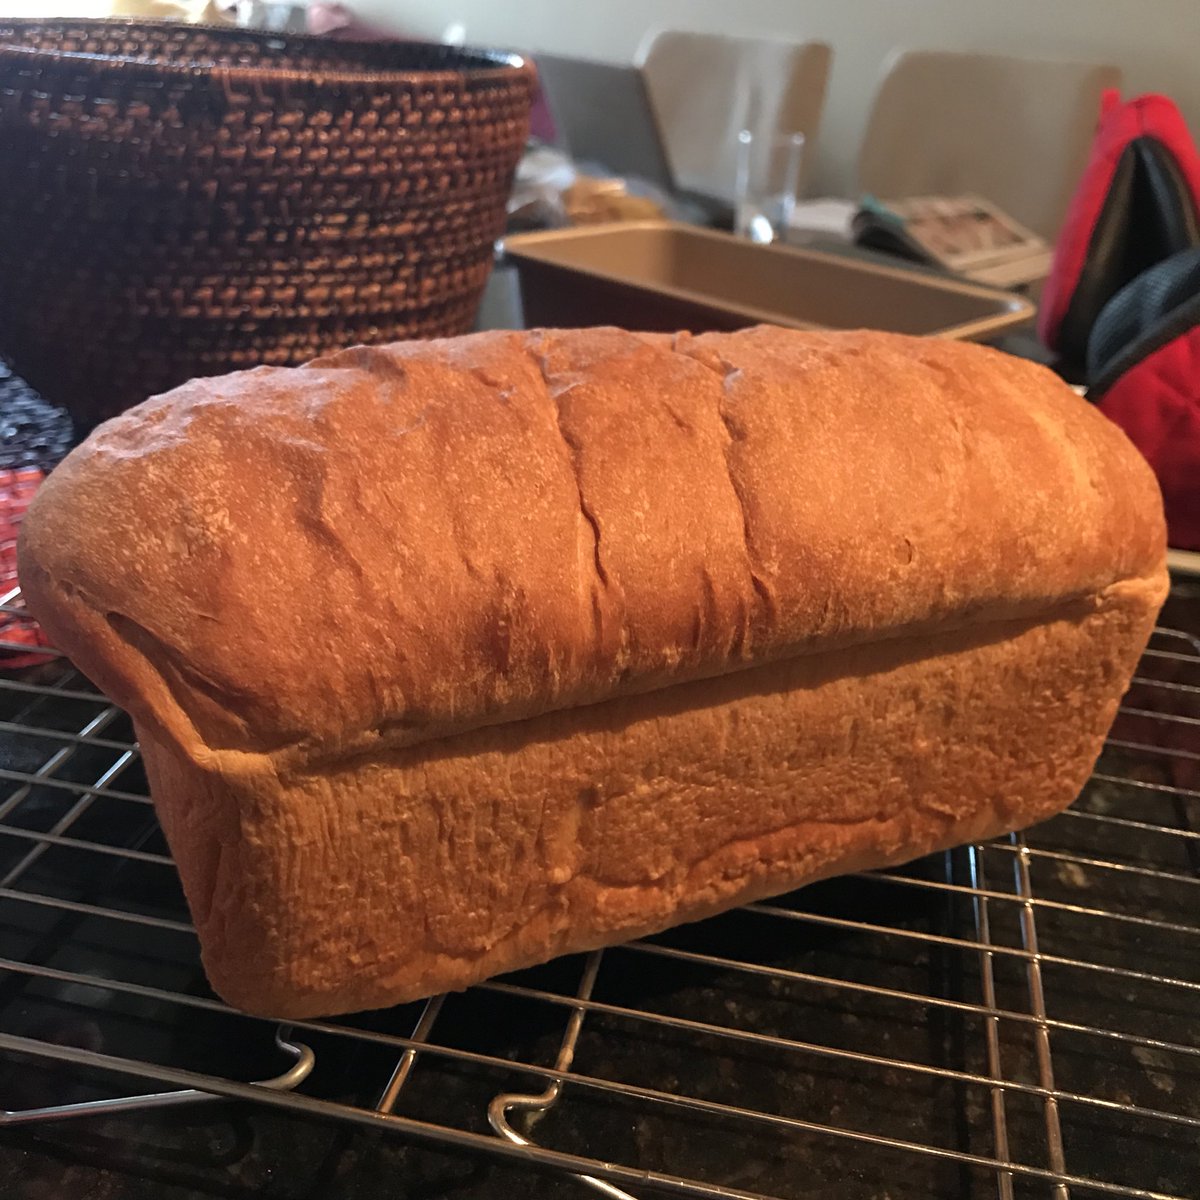 Bread #13: American Sandwich Bread. This bread is somewhat time-intensive (7-8 hours including cooling!) but not labor intensive. The result is a lovely, pillowy-soft loaf that’s basically like a real-life bread emoji. 